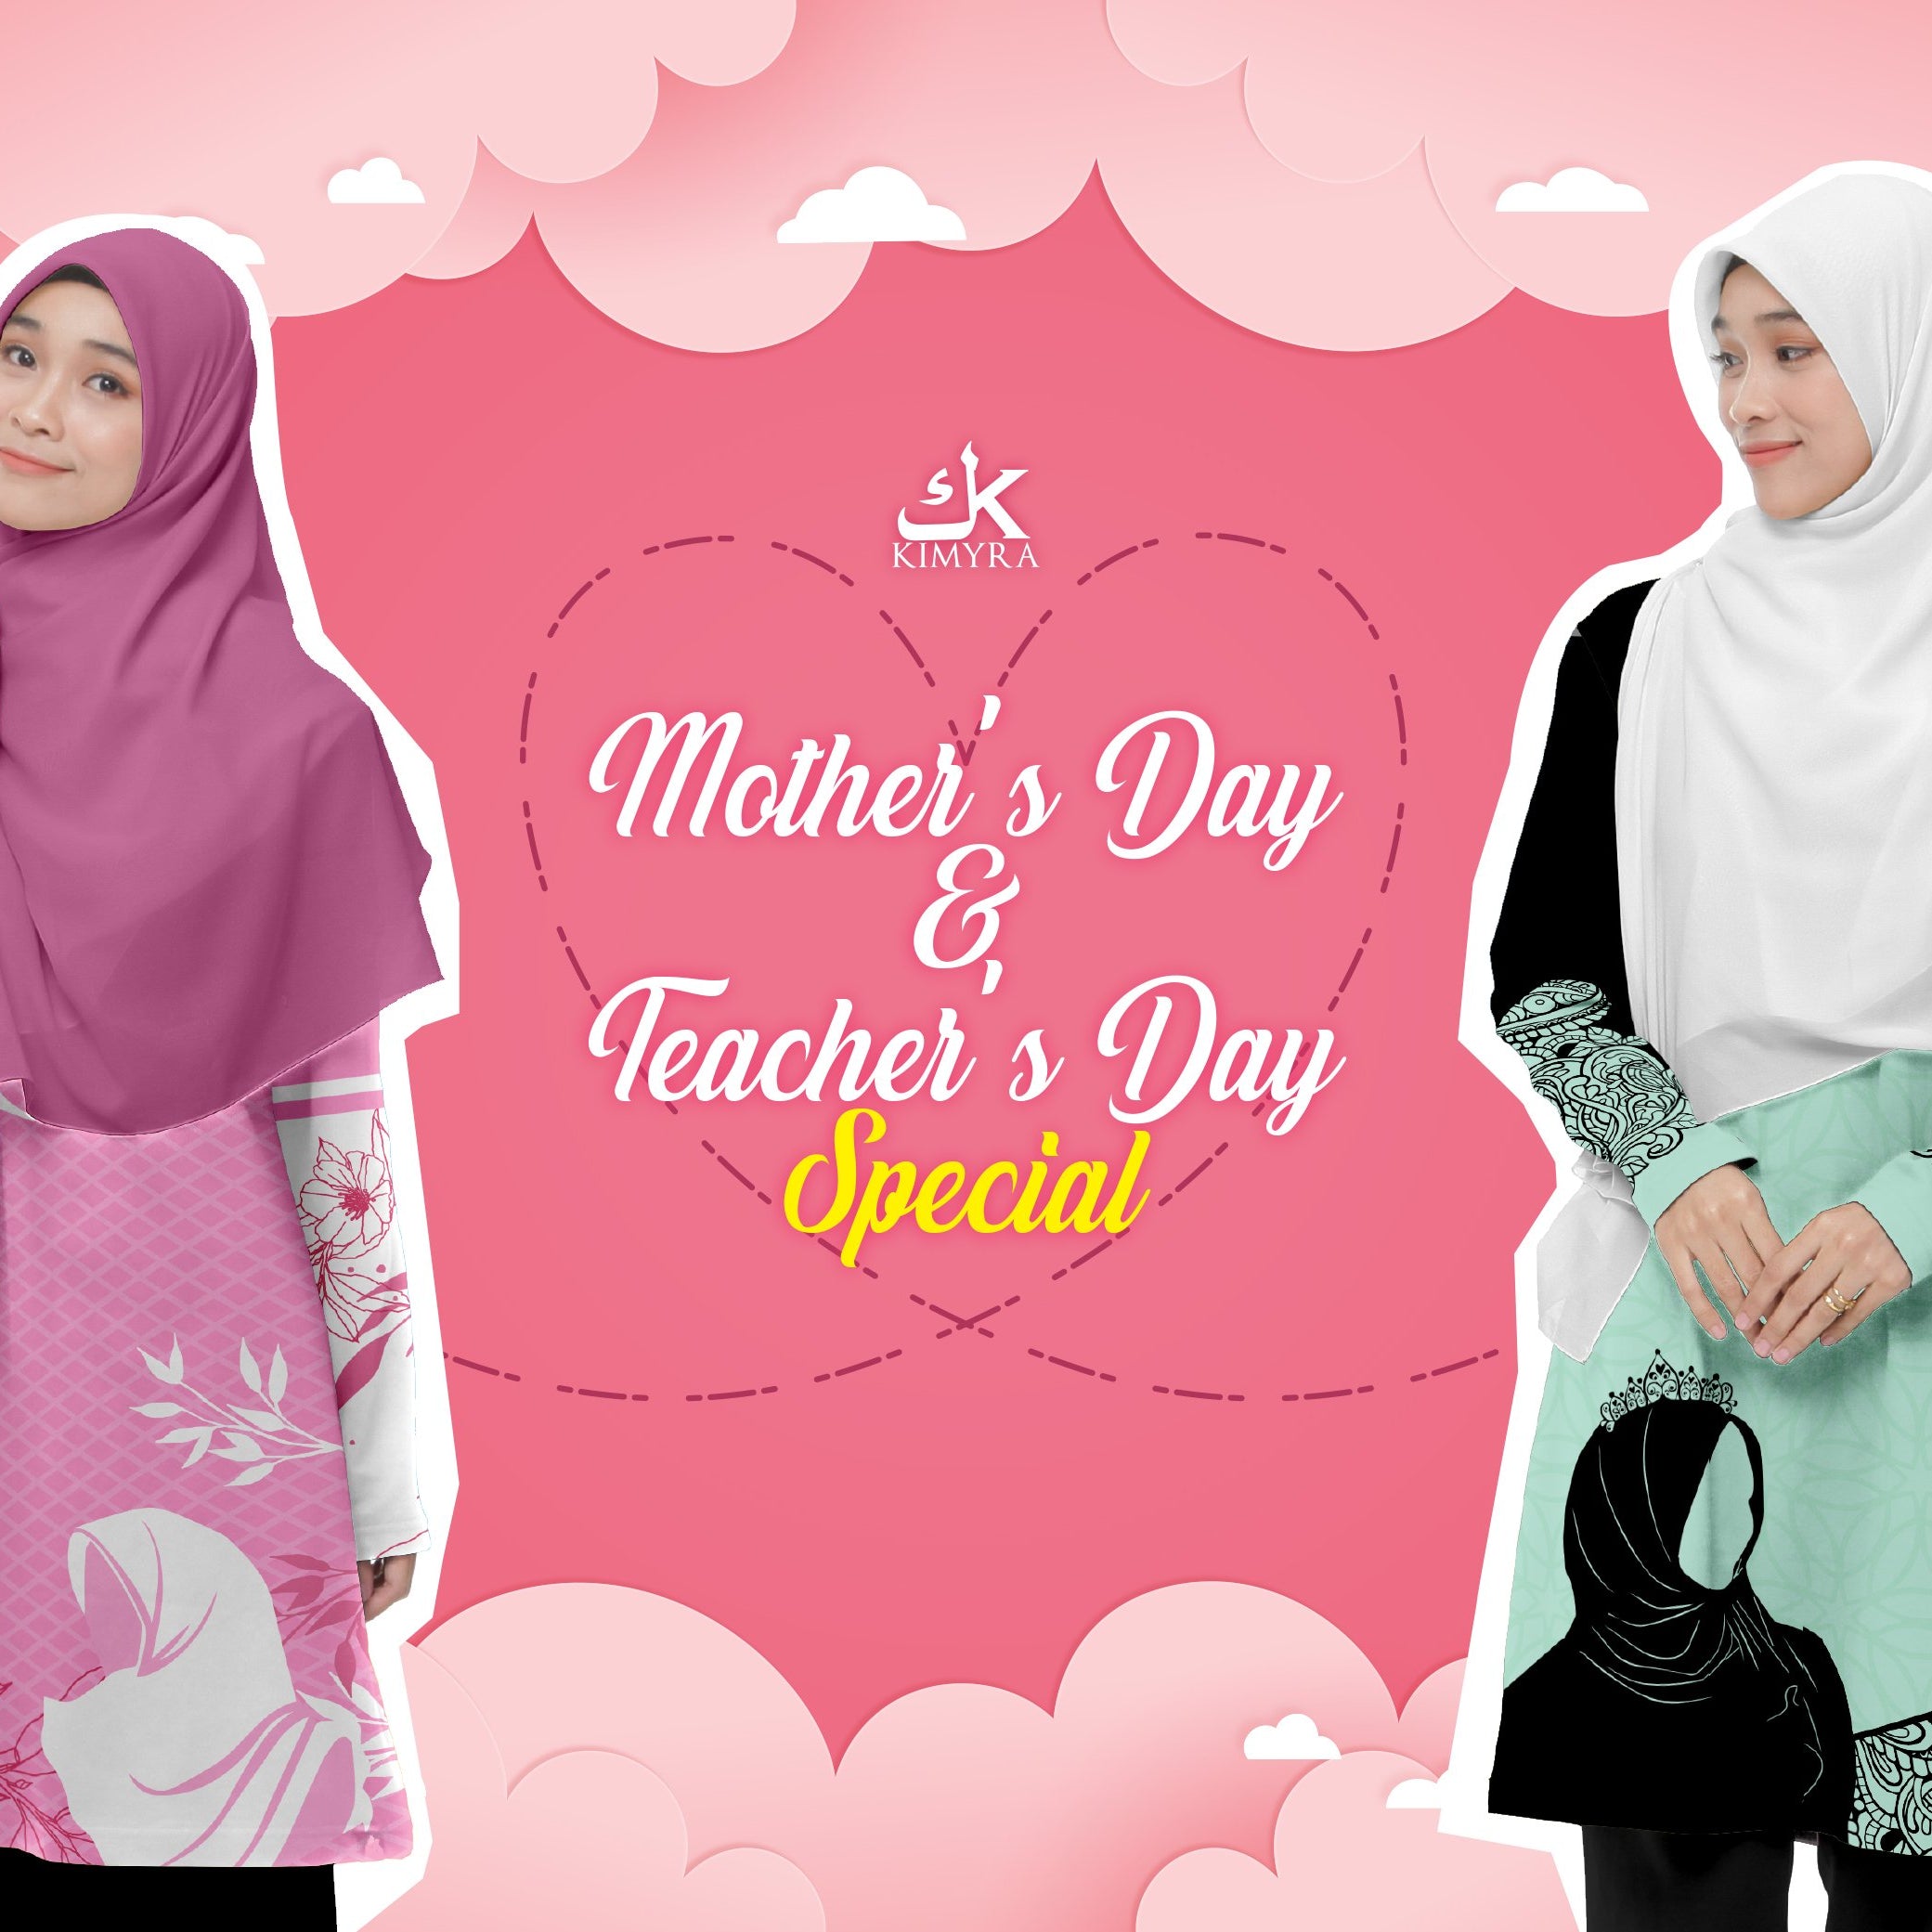 MOTHER'S DAY & TEACHER'S DAY SPECIAL